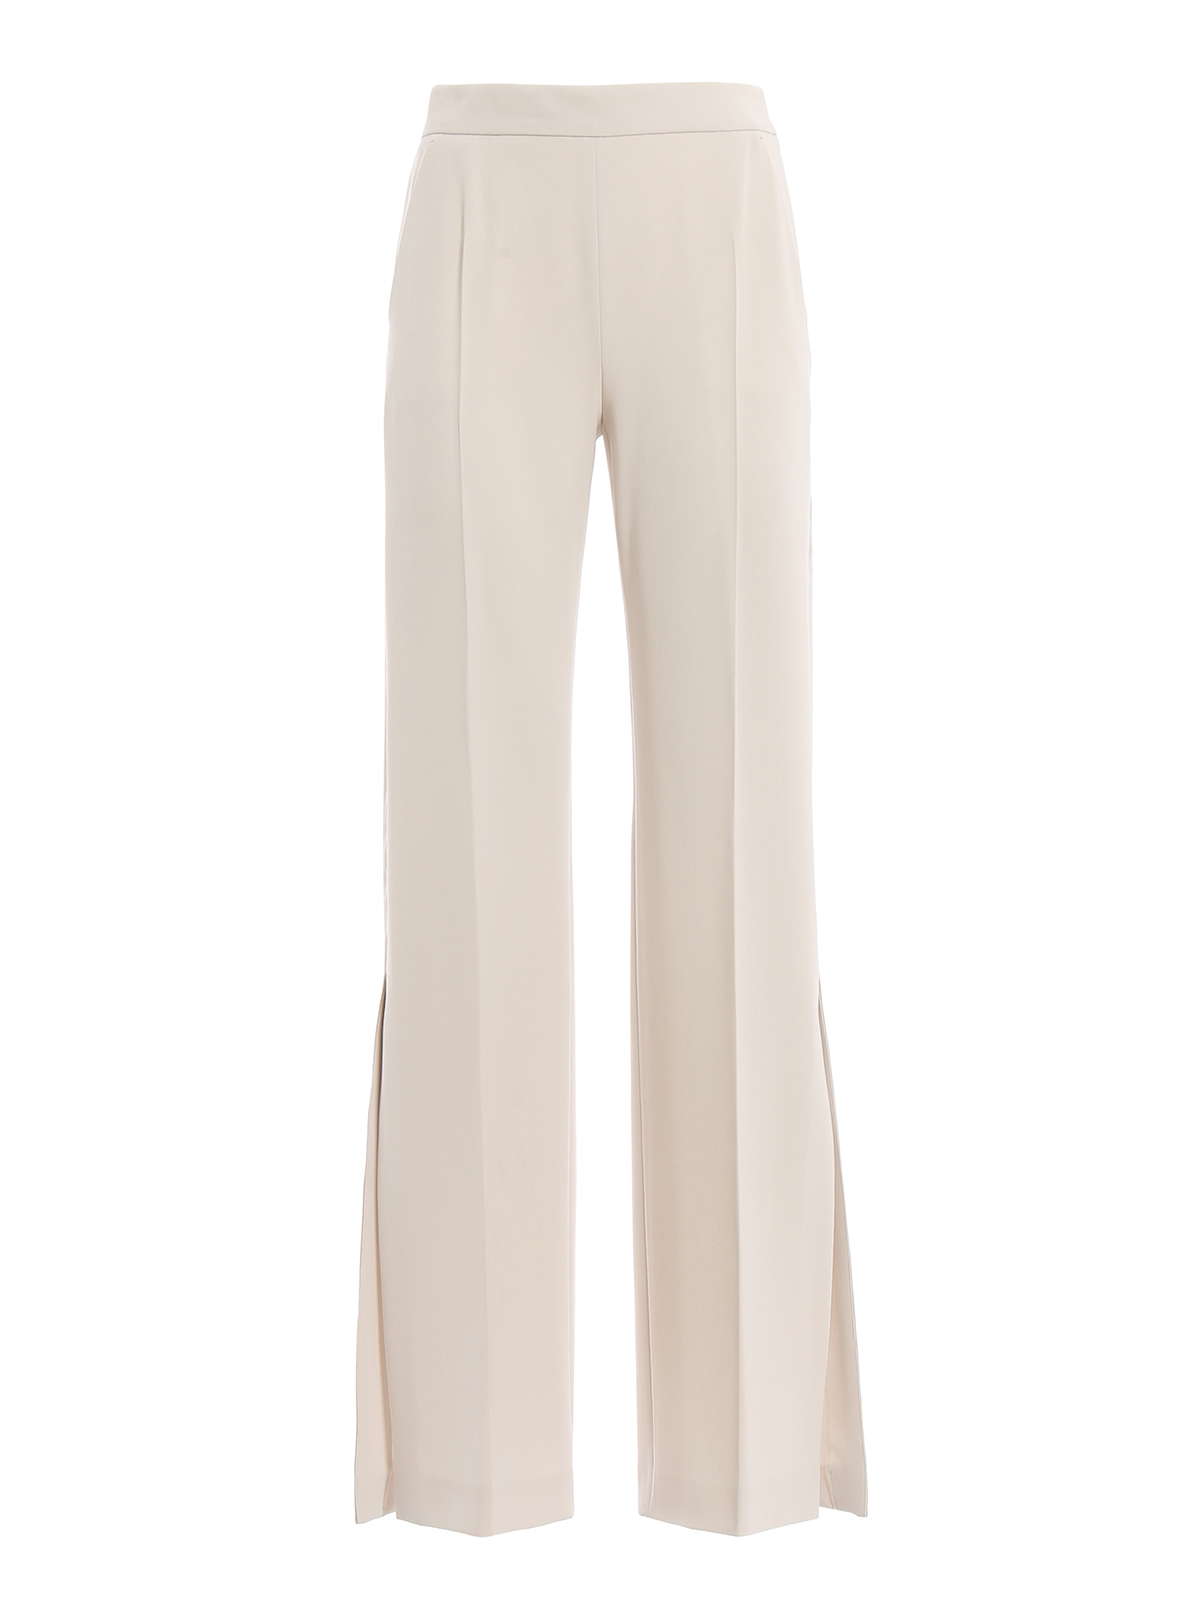 Tailored & Formal trousers Max Mara - Vicario tech cady tux trousers ...